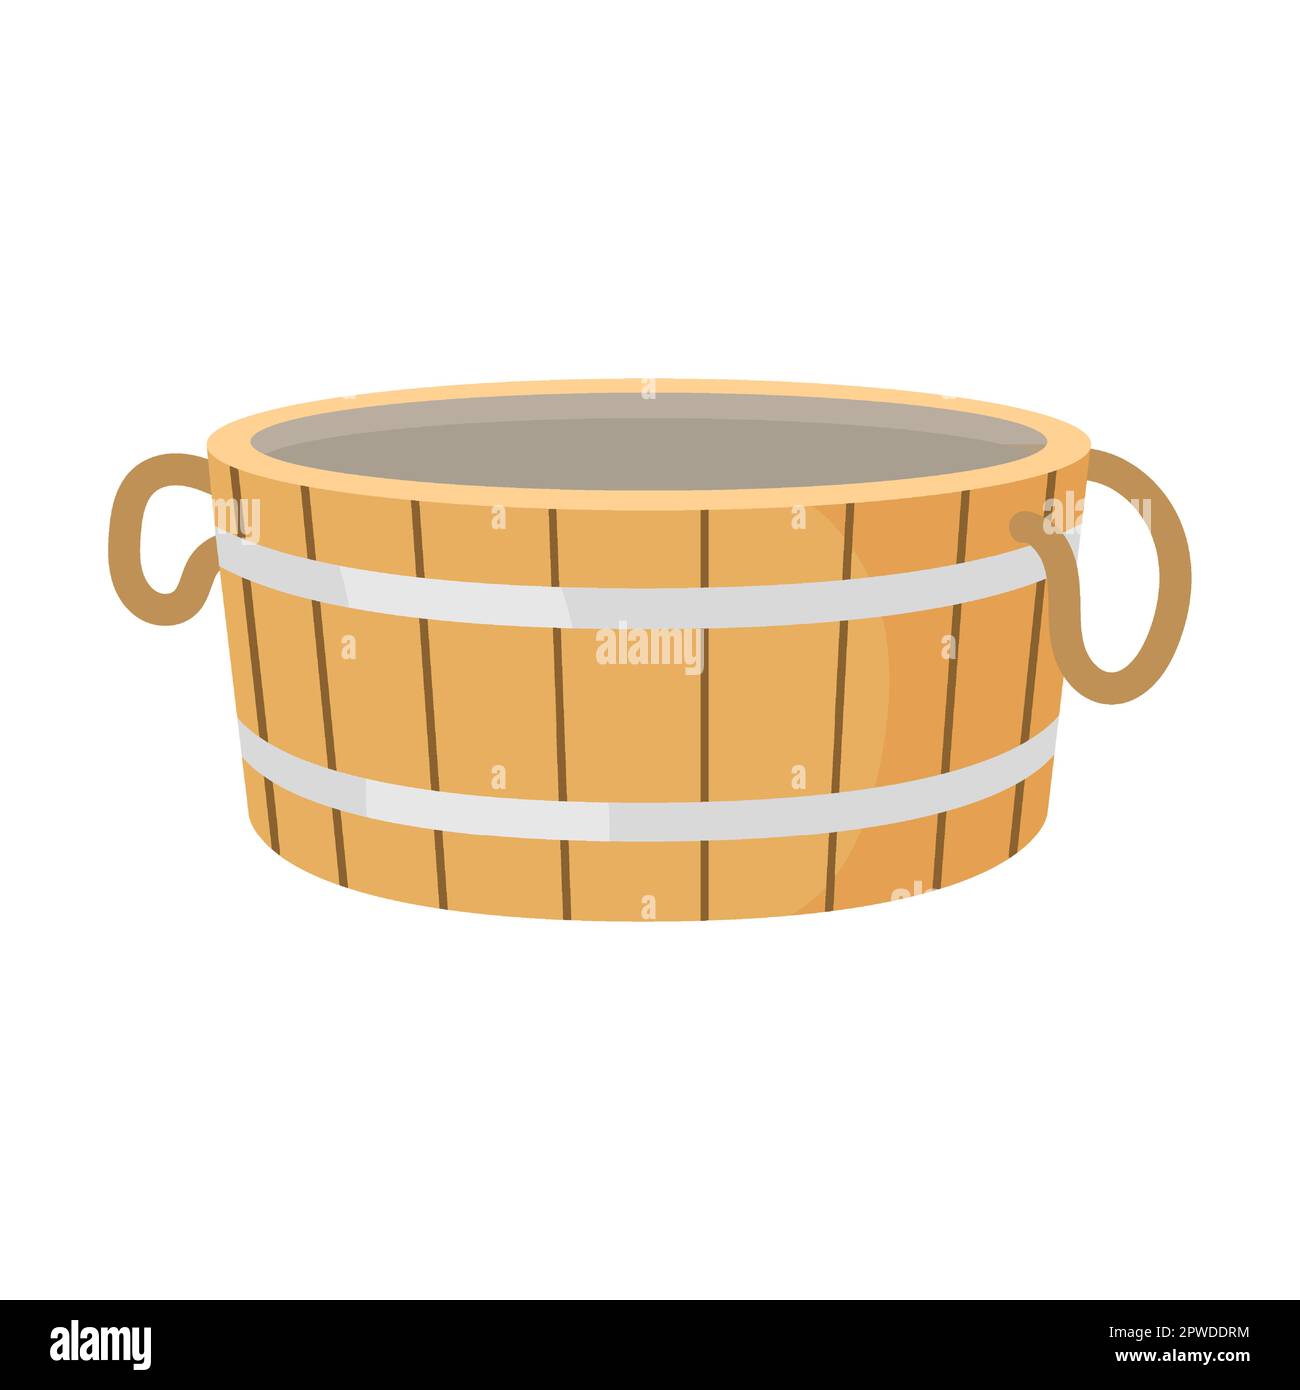 wooden basin with handles for saunas and baths, barrel and bucket with convenient spout for draining water. Vector illustration of cute colorful Stock Vector